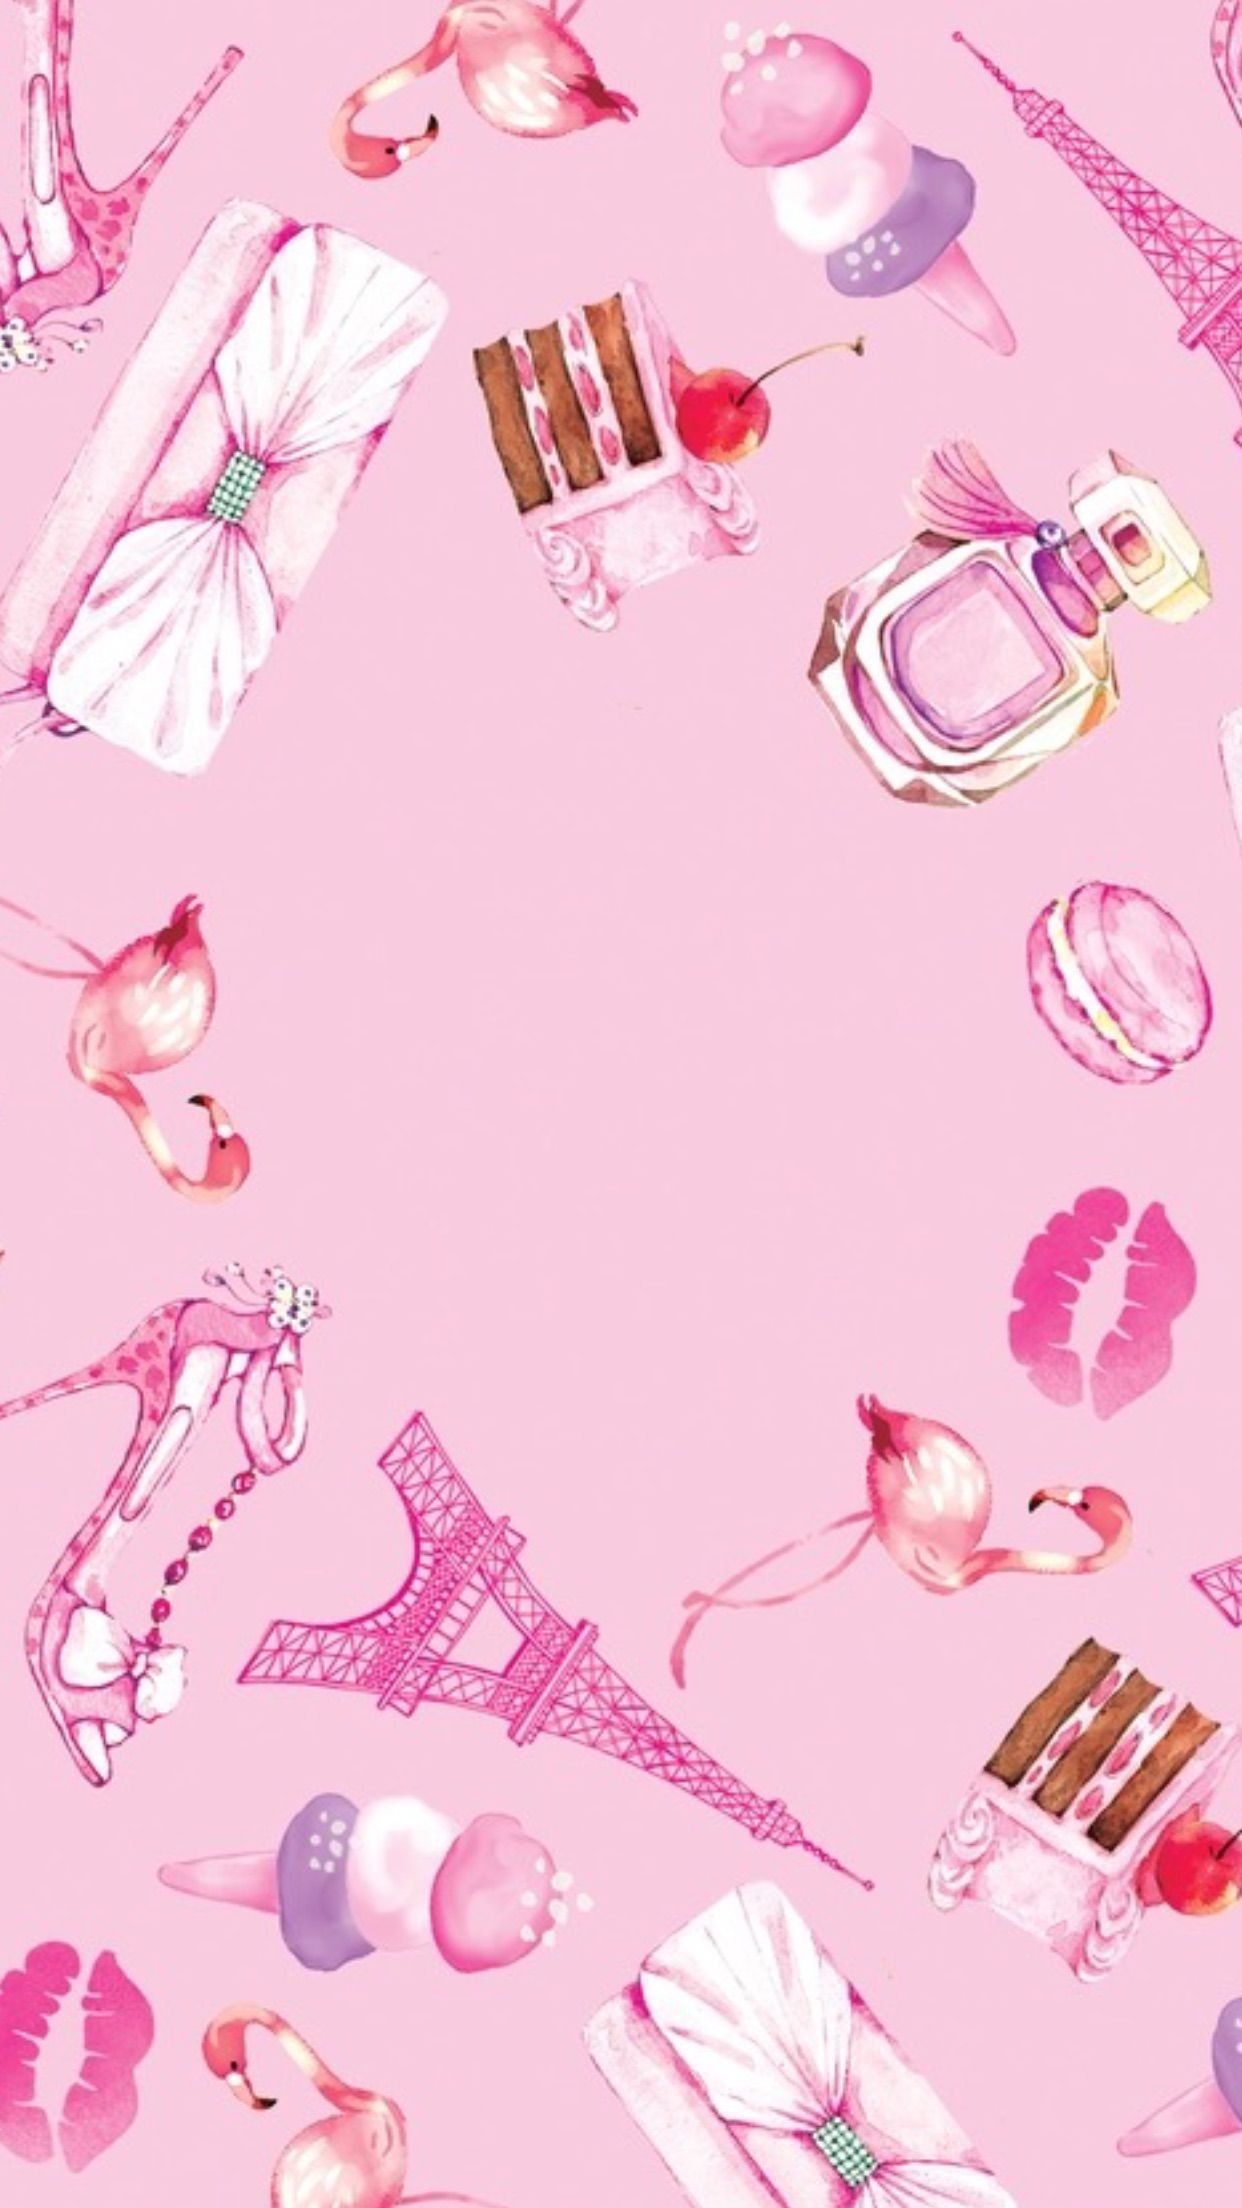 pink girly things background